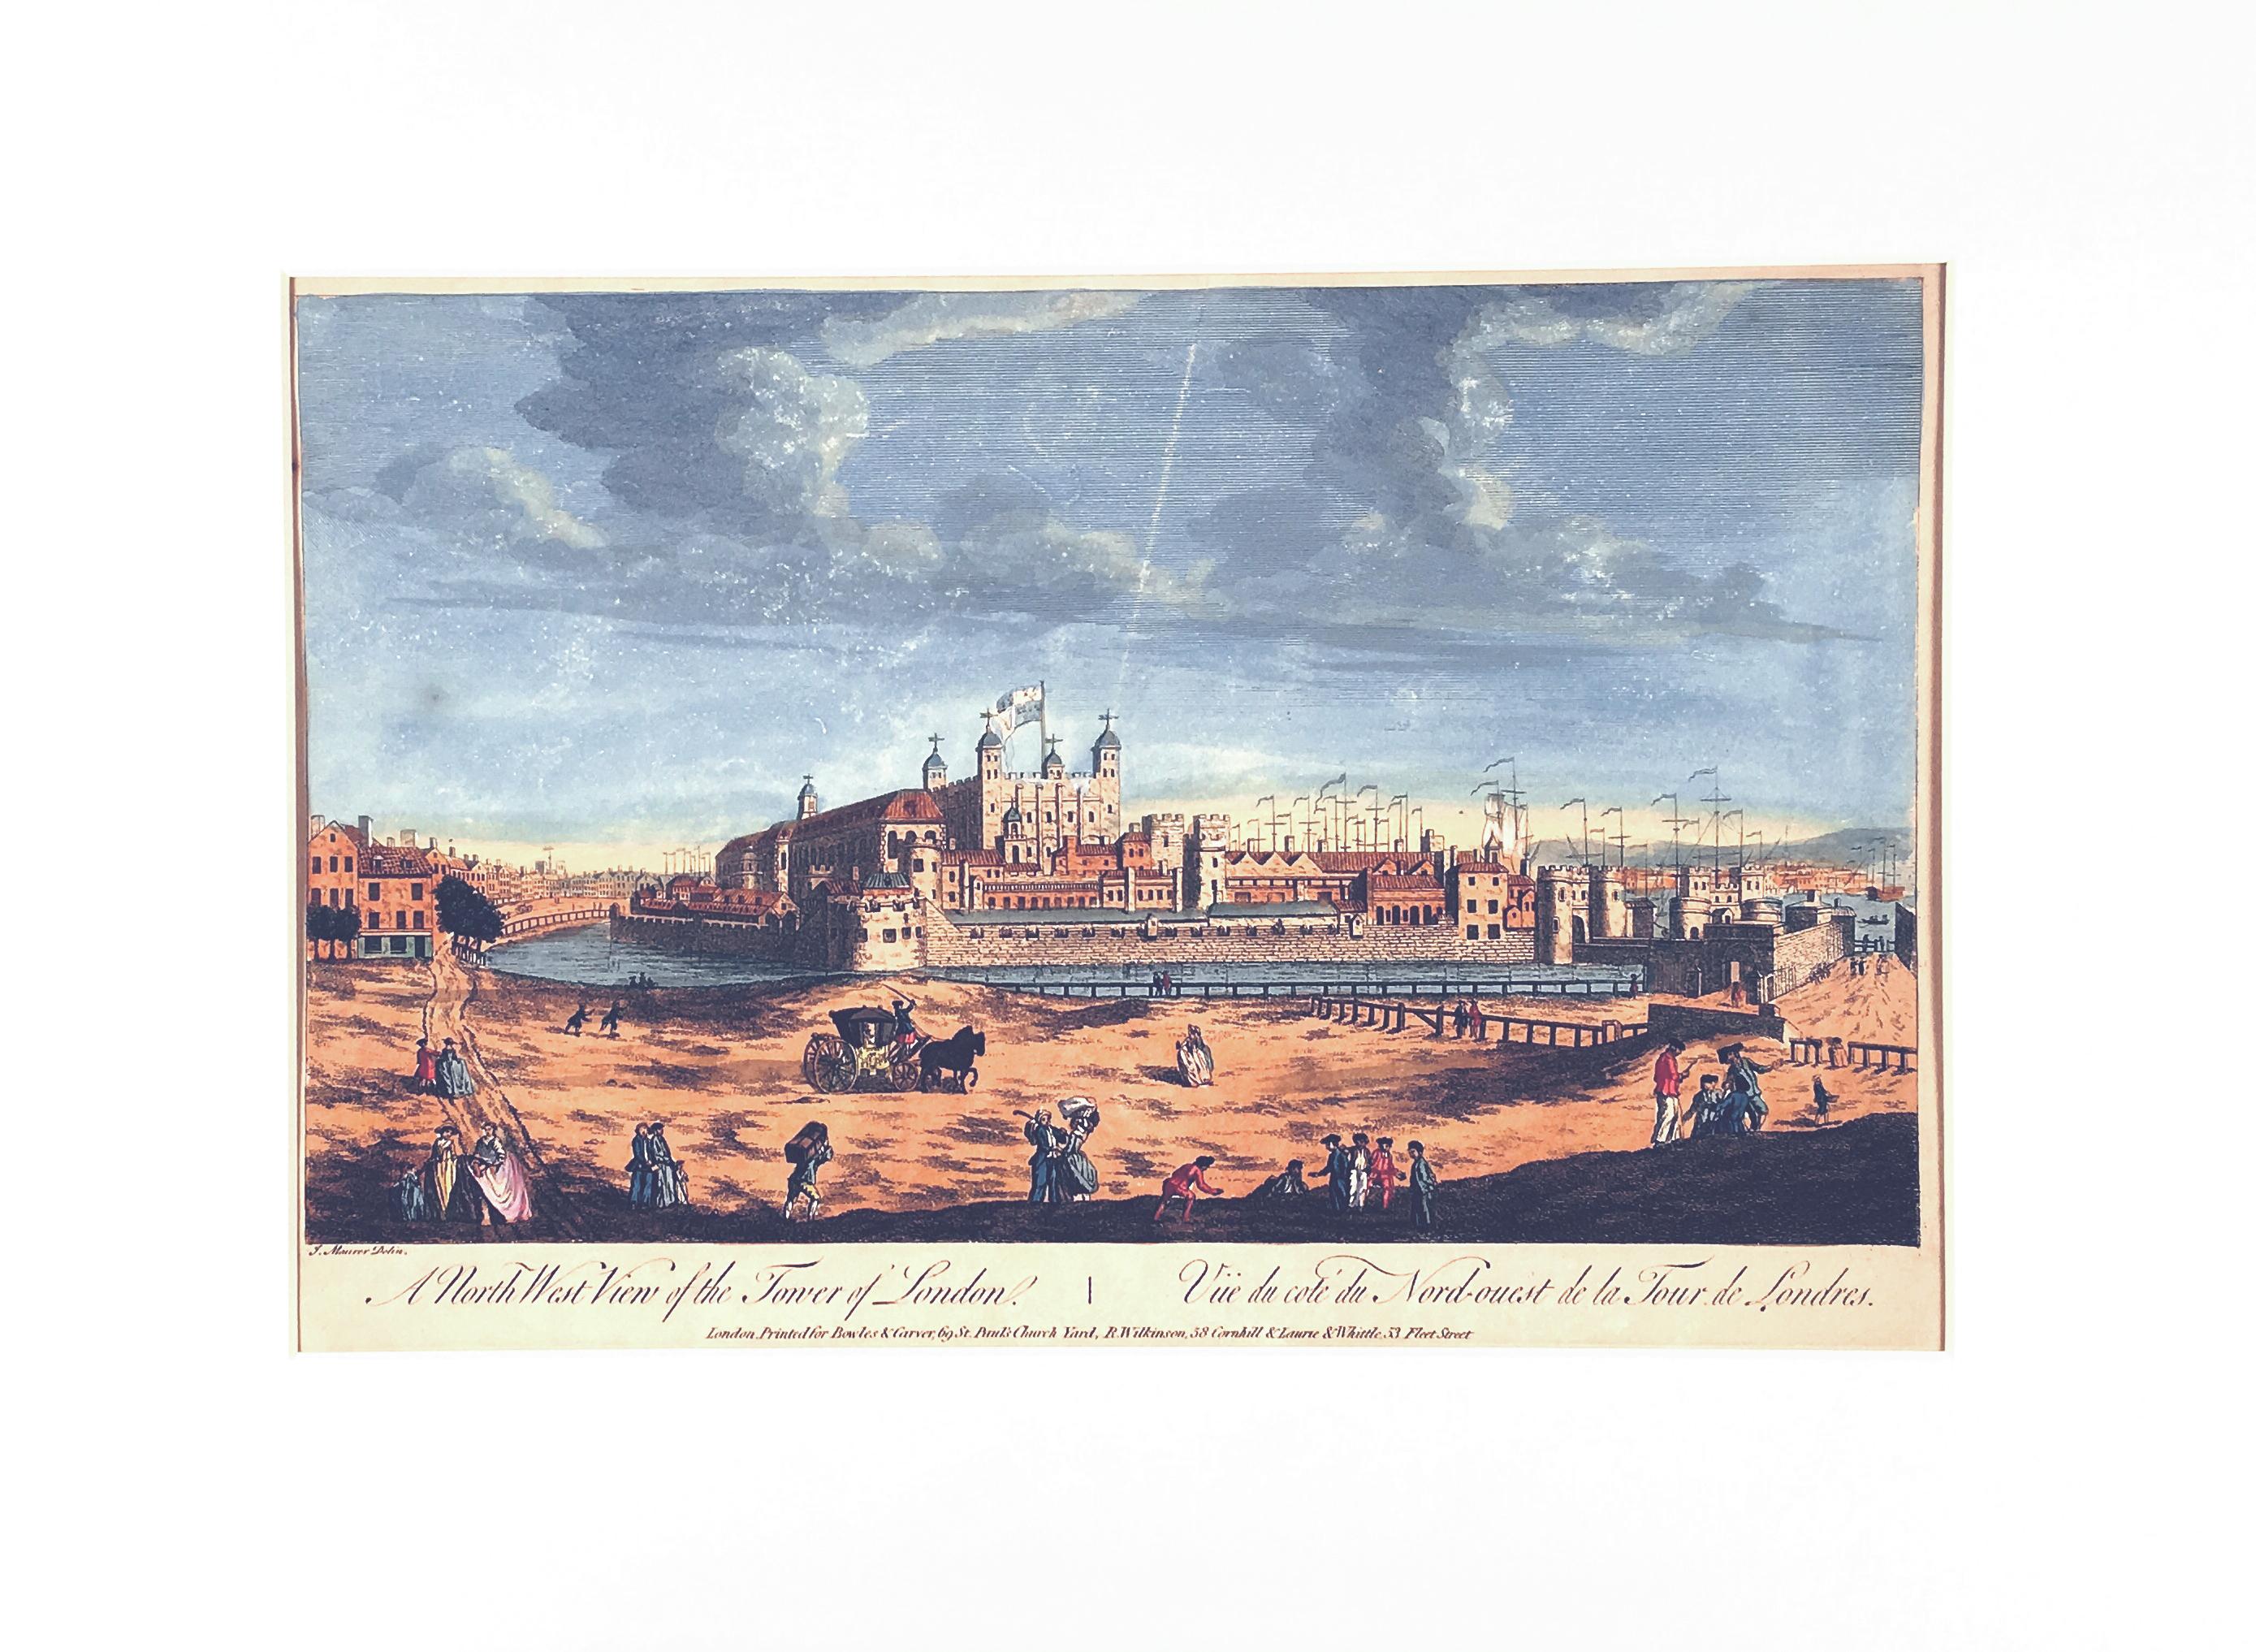 J. Maurer Landscape Print - "A Northwest View of The Tower of London"